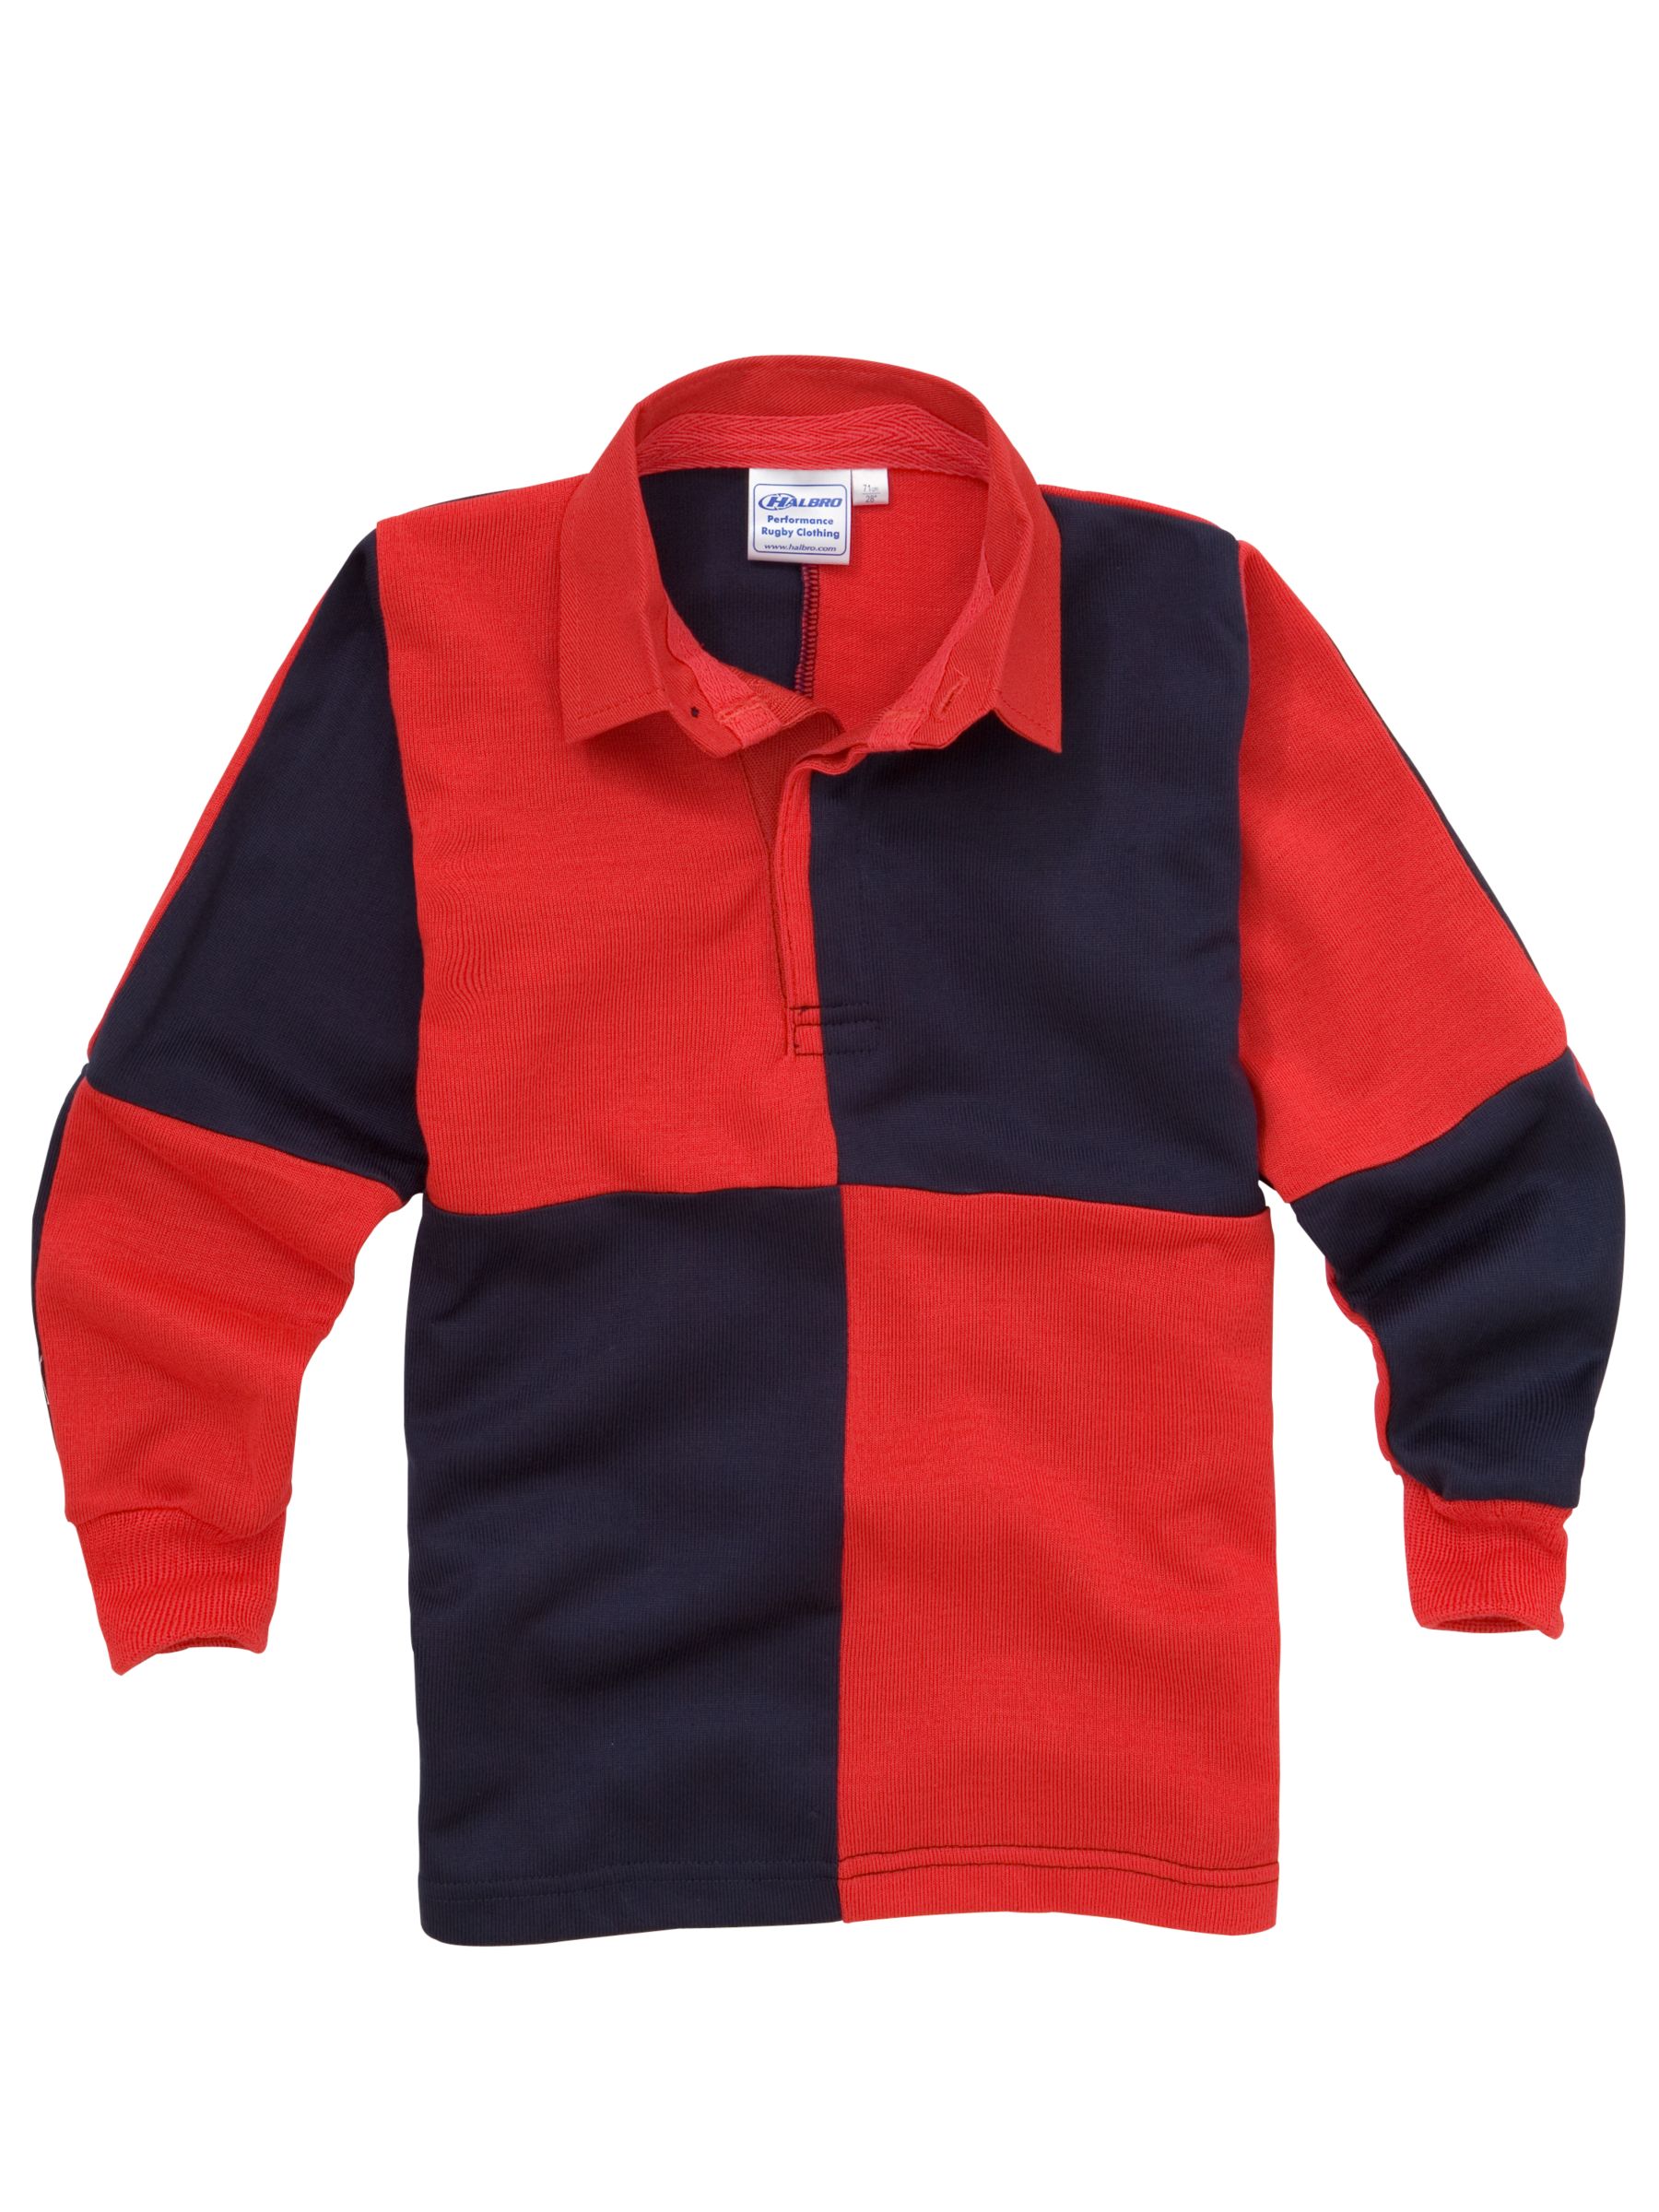 Other Schools Schools Unisex Rugby Shirt, Navy/red